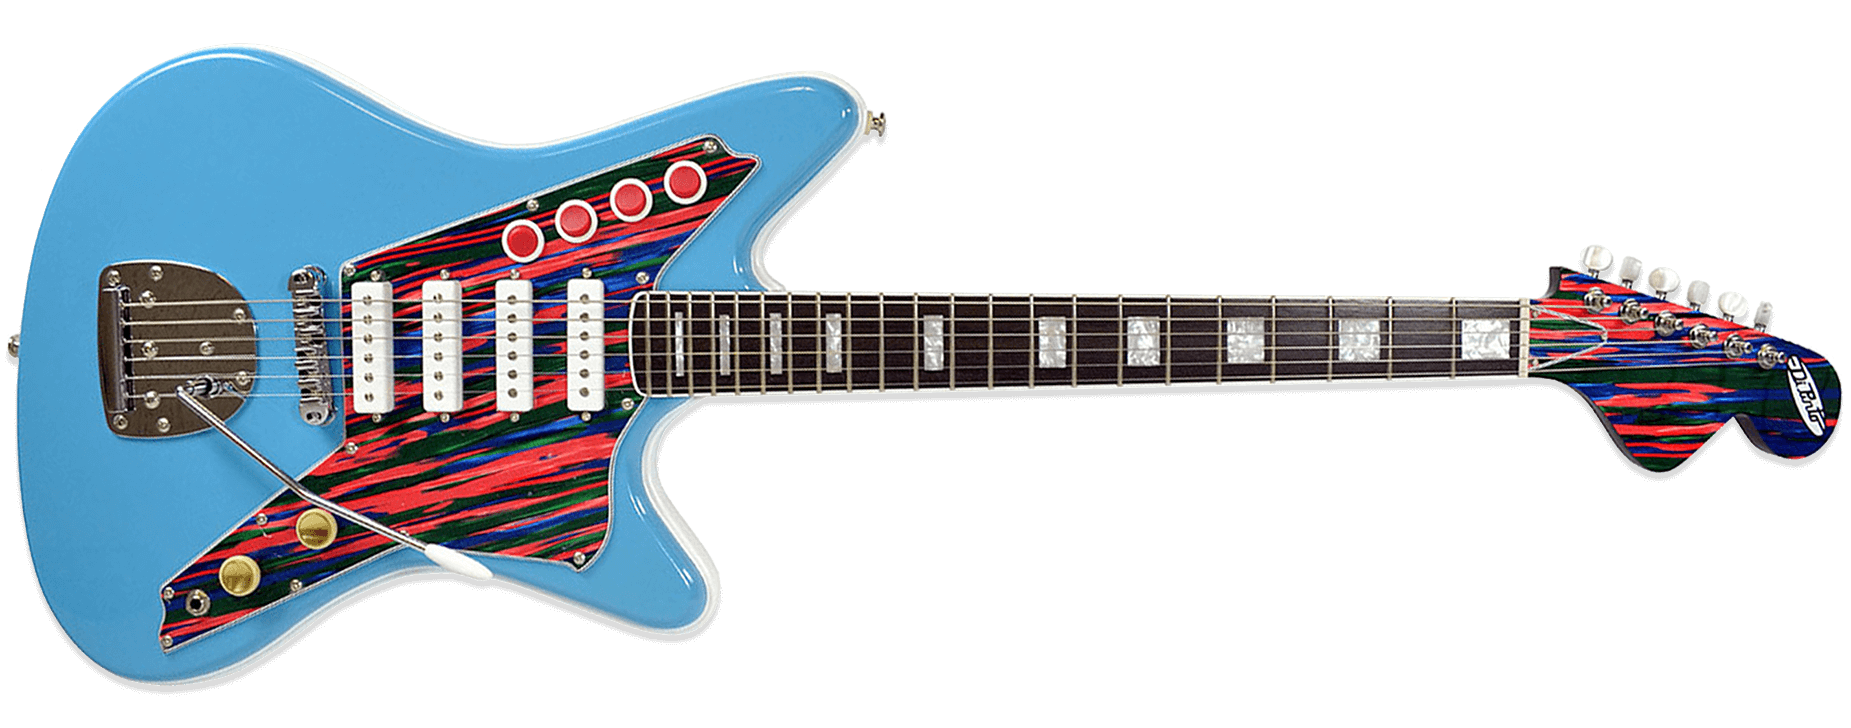 DiPinto Galaxie 4 Deluxe Sonic Blue